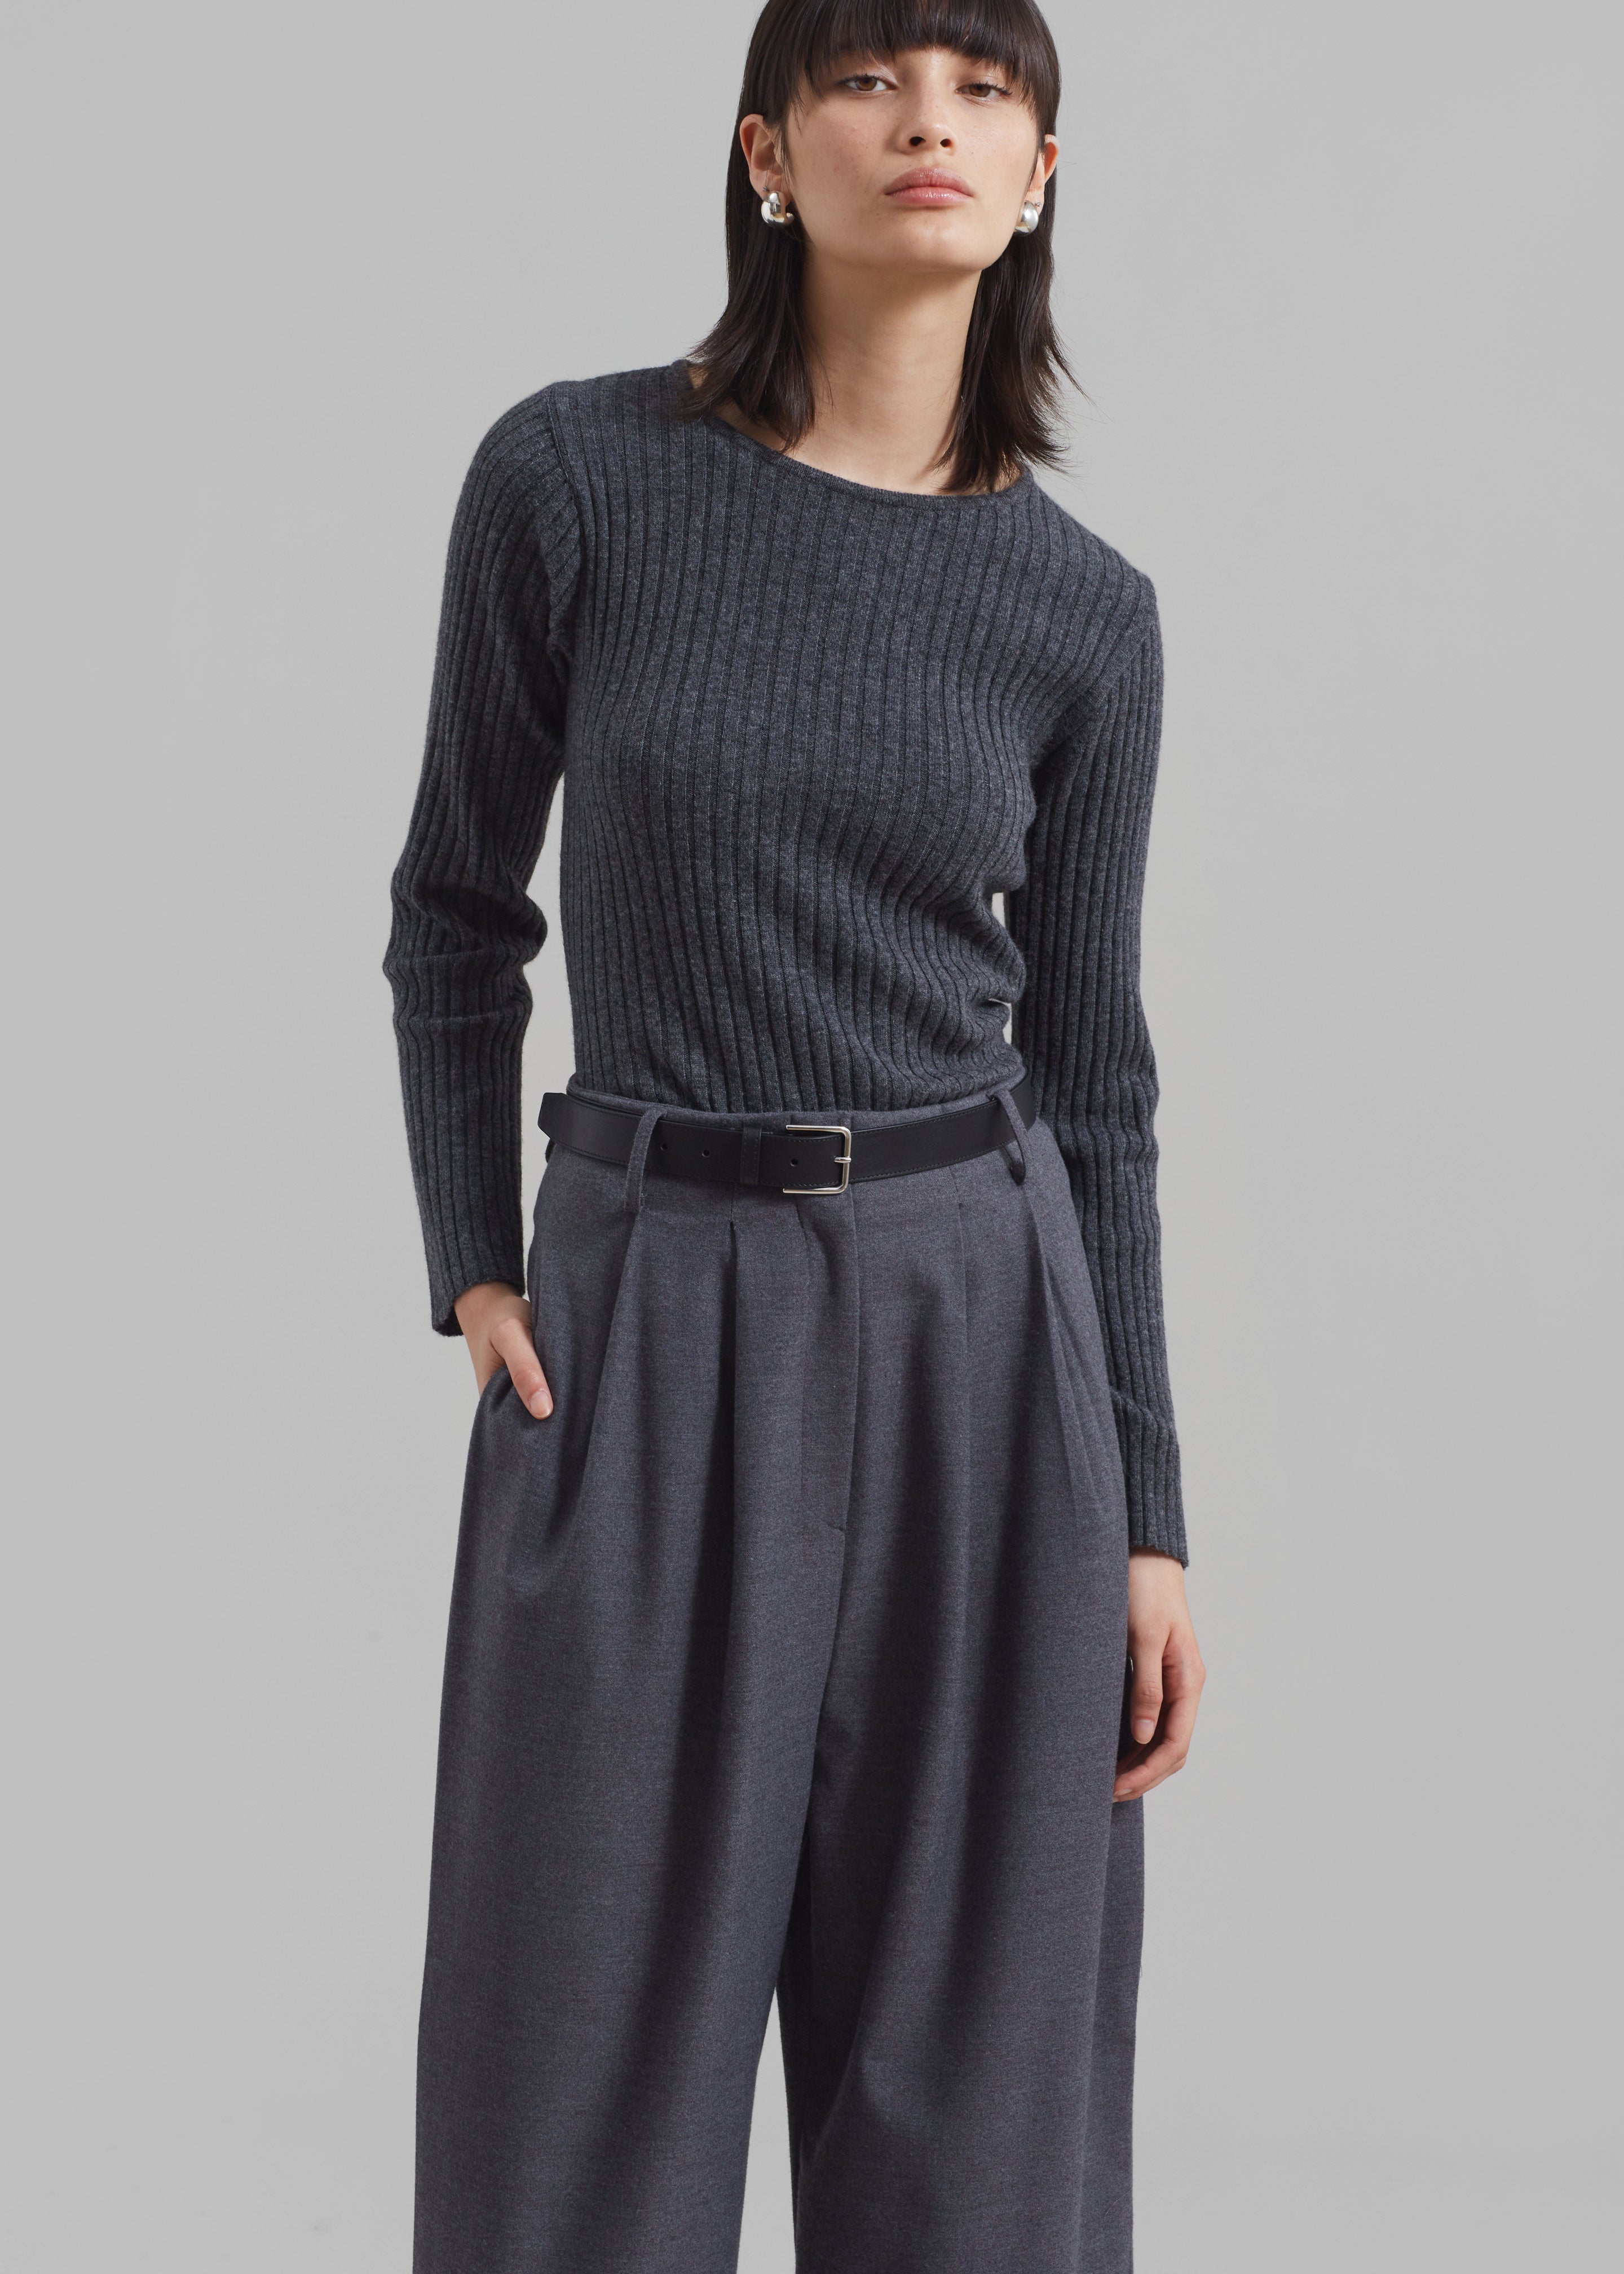 Cora Ribbed Sweater - Charcoal - 6